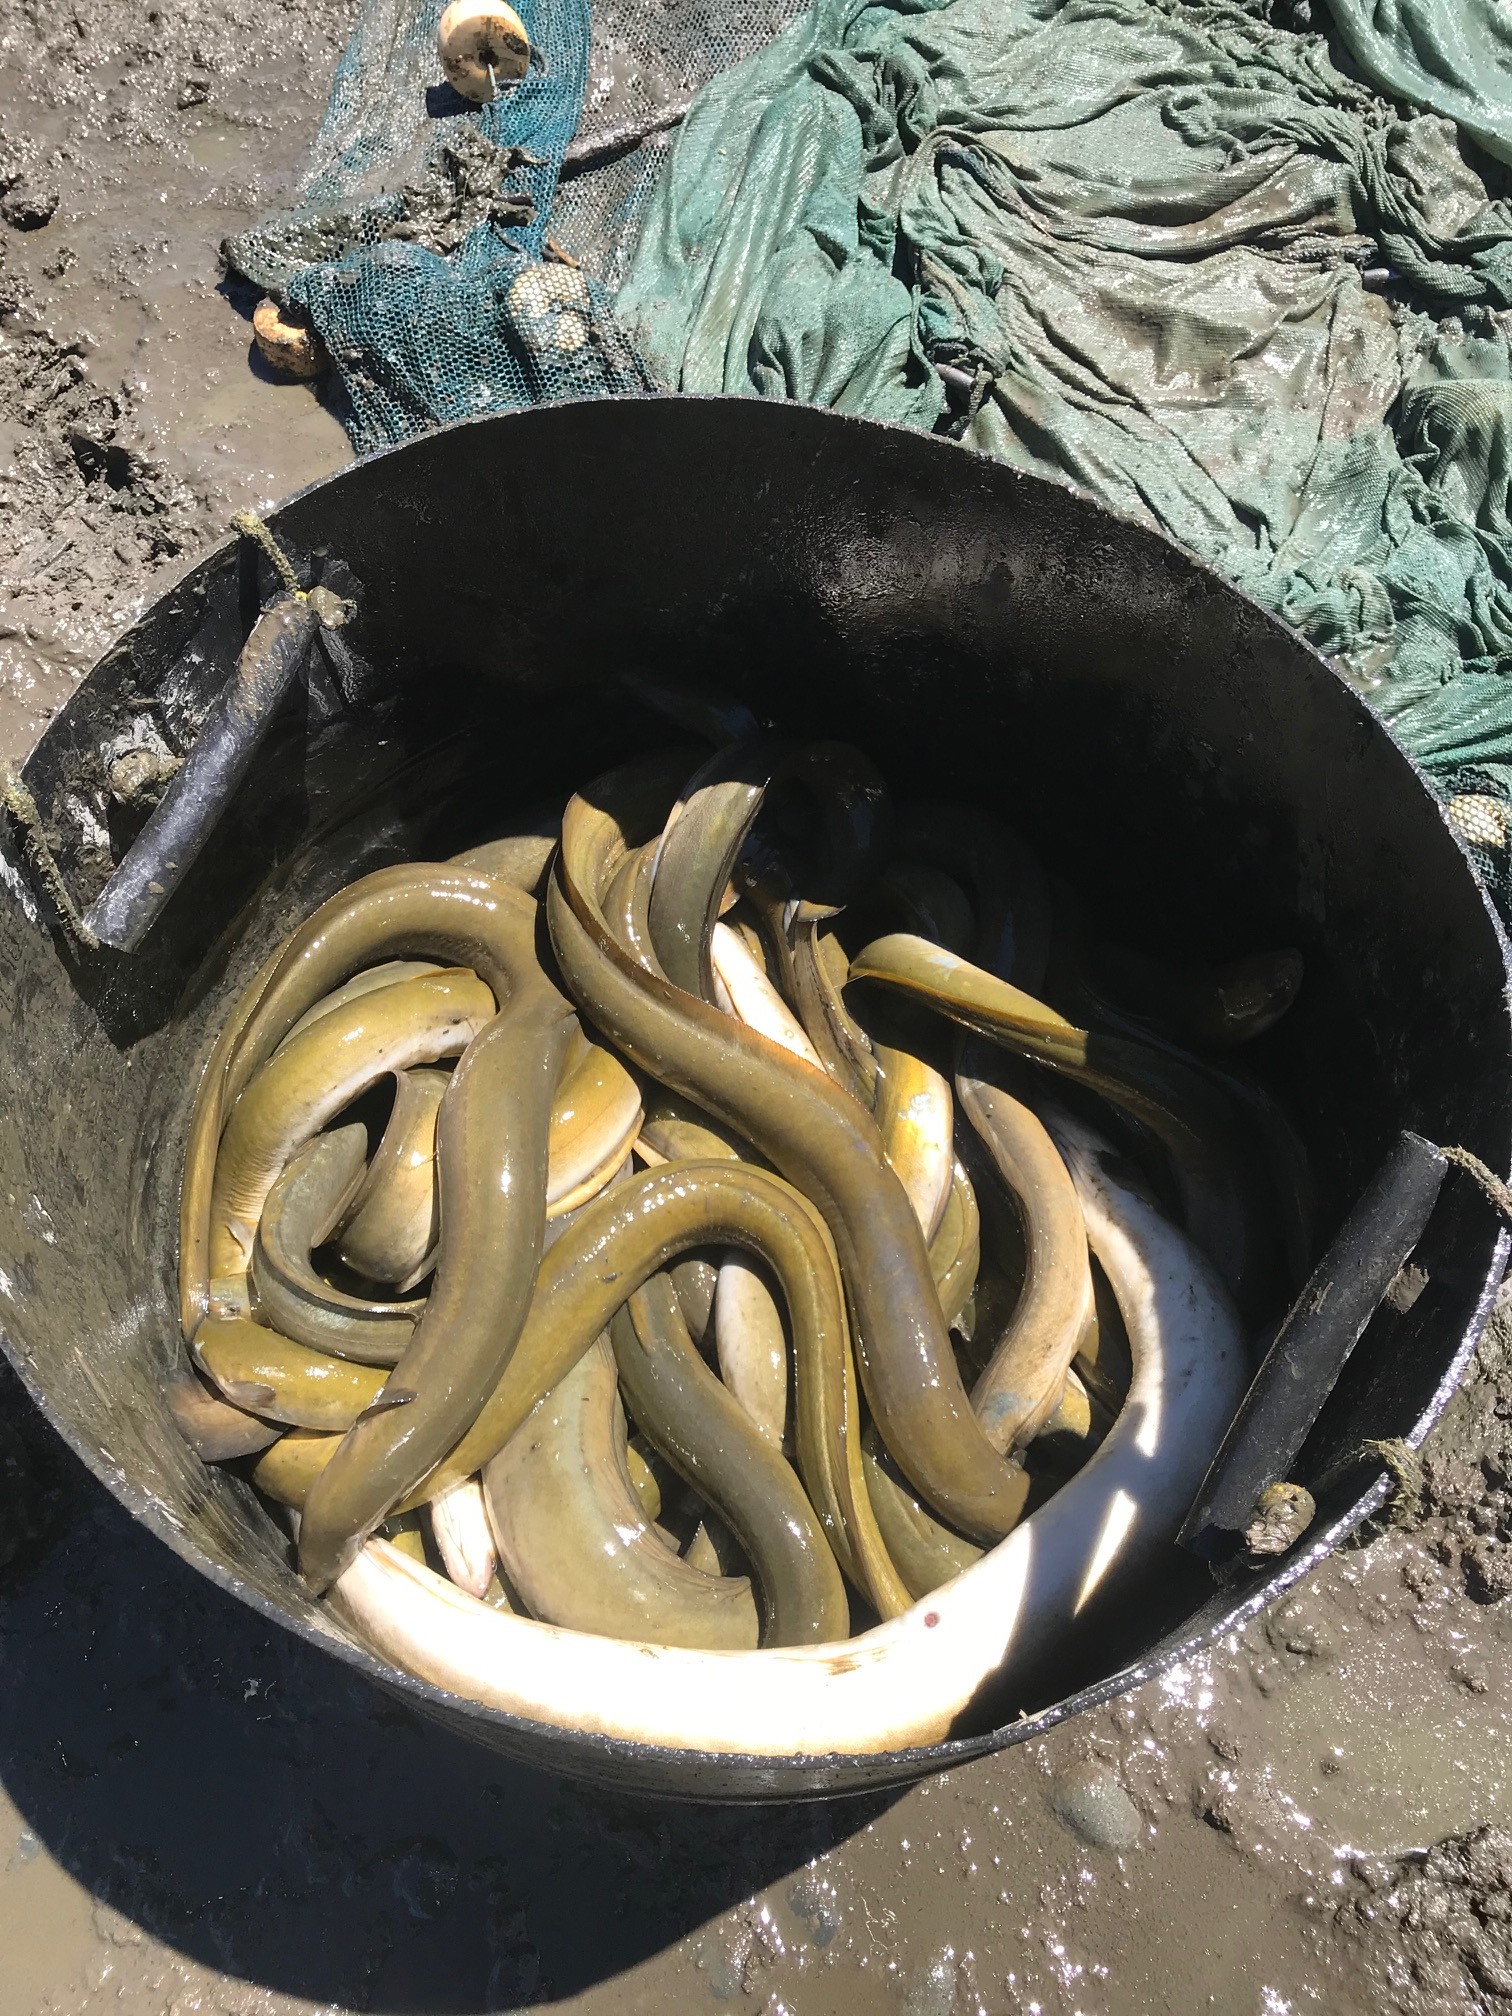 Eels in a bucket, awaiting relocation to a new home. Photo: Supplied